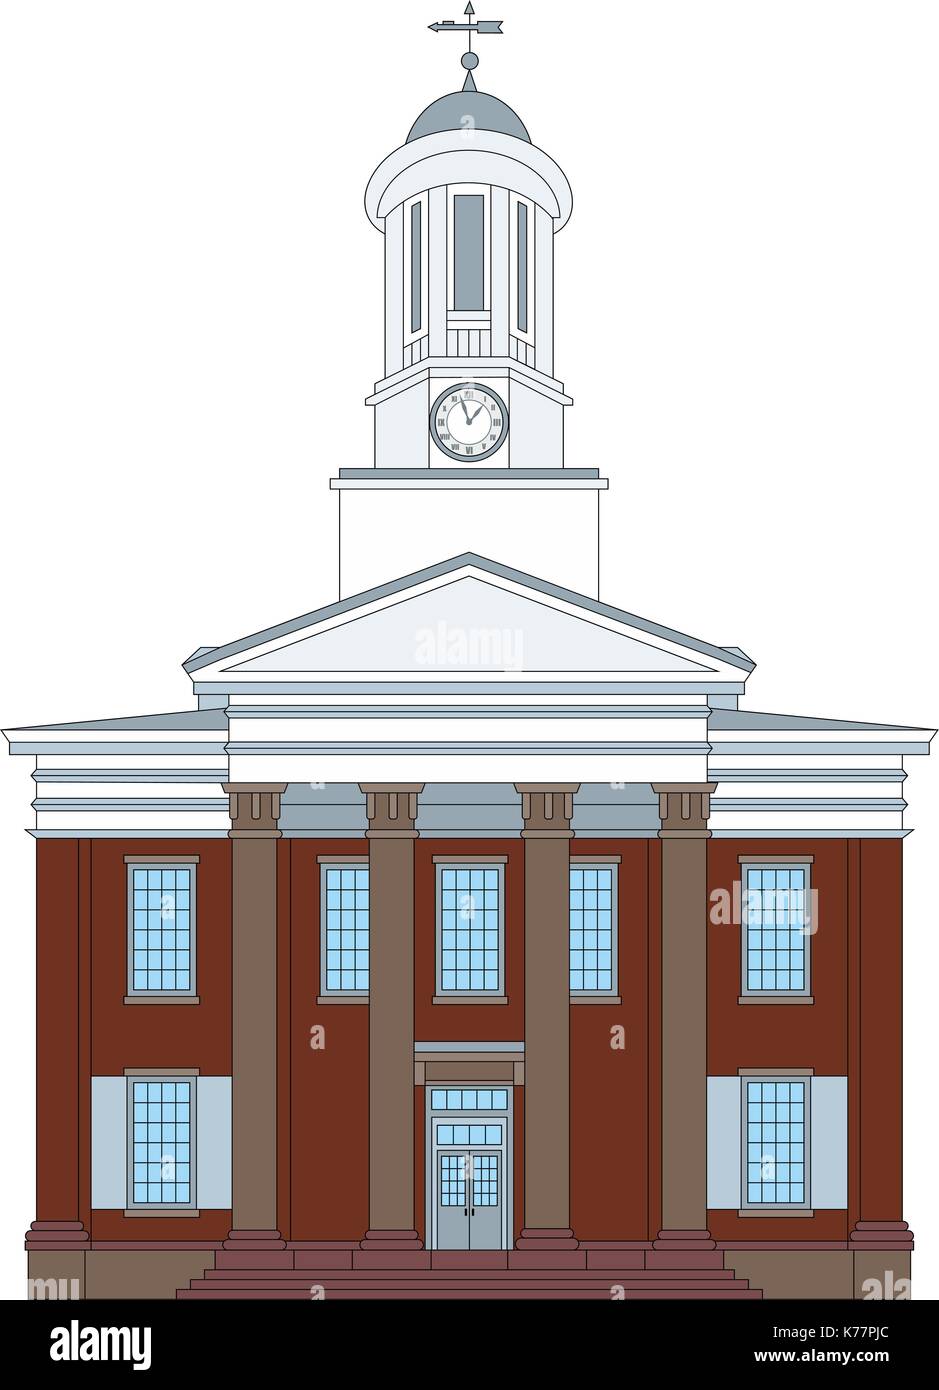 Sketch of the Cumberland County Courthouse in Carlisle, Pennsylvania Stock Vector